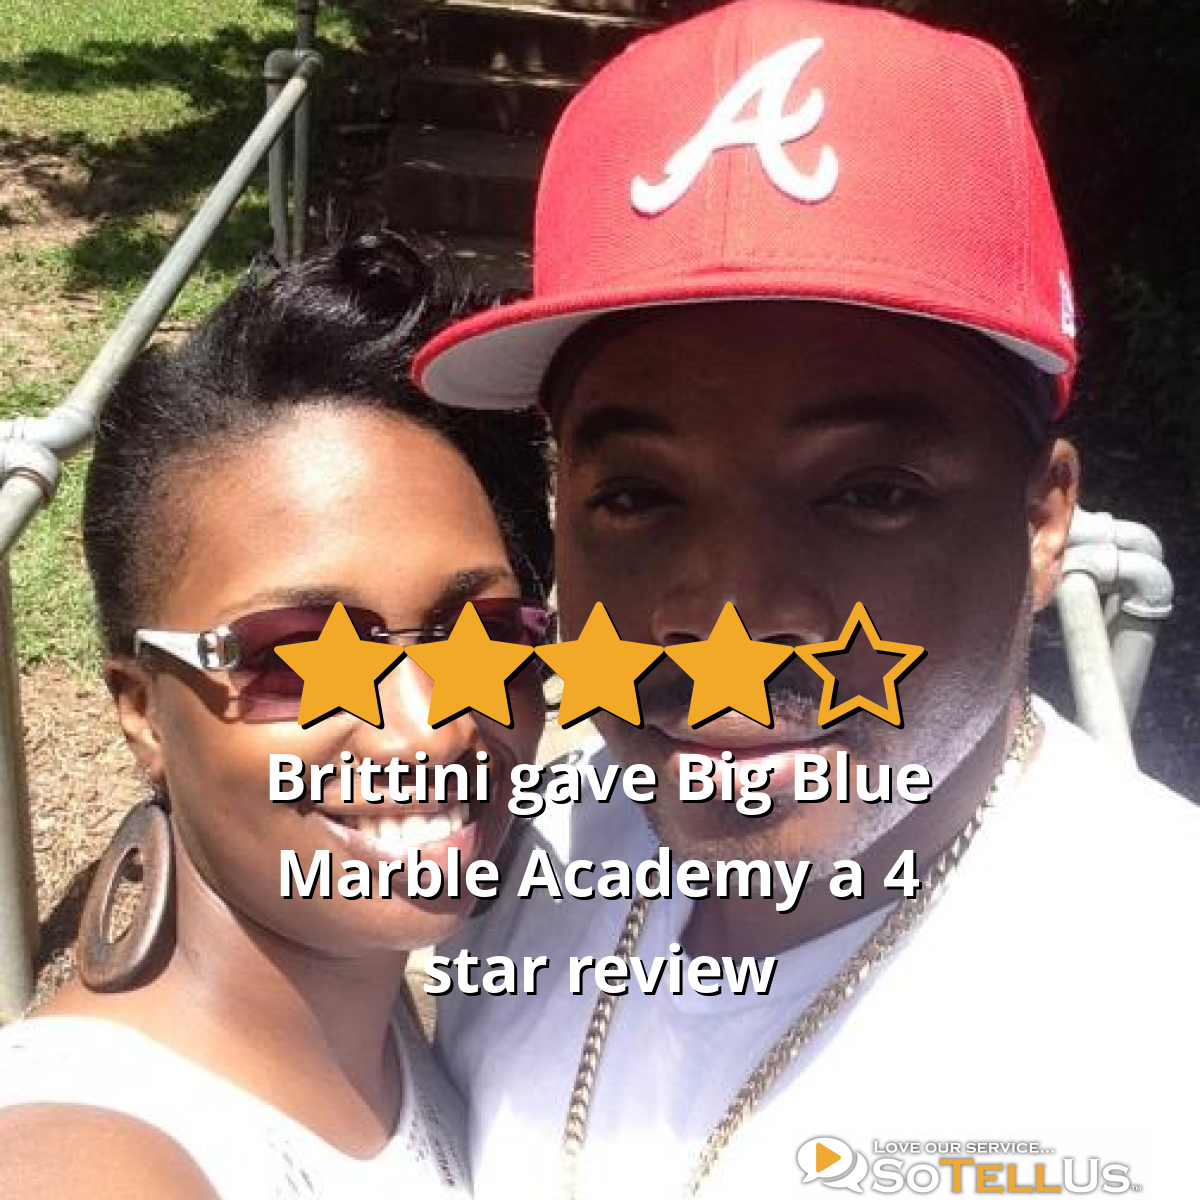 Brittini H Gave Big Blue Marble Academy A 4 Star Review On Sotellus 4380